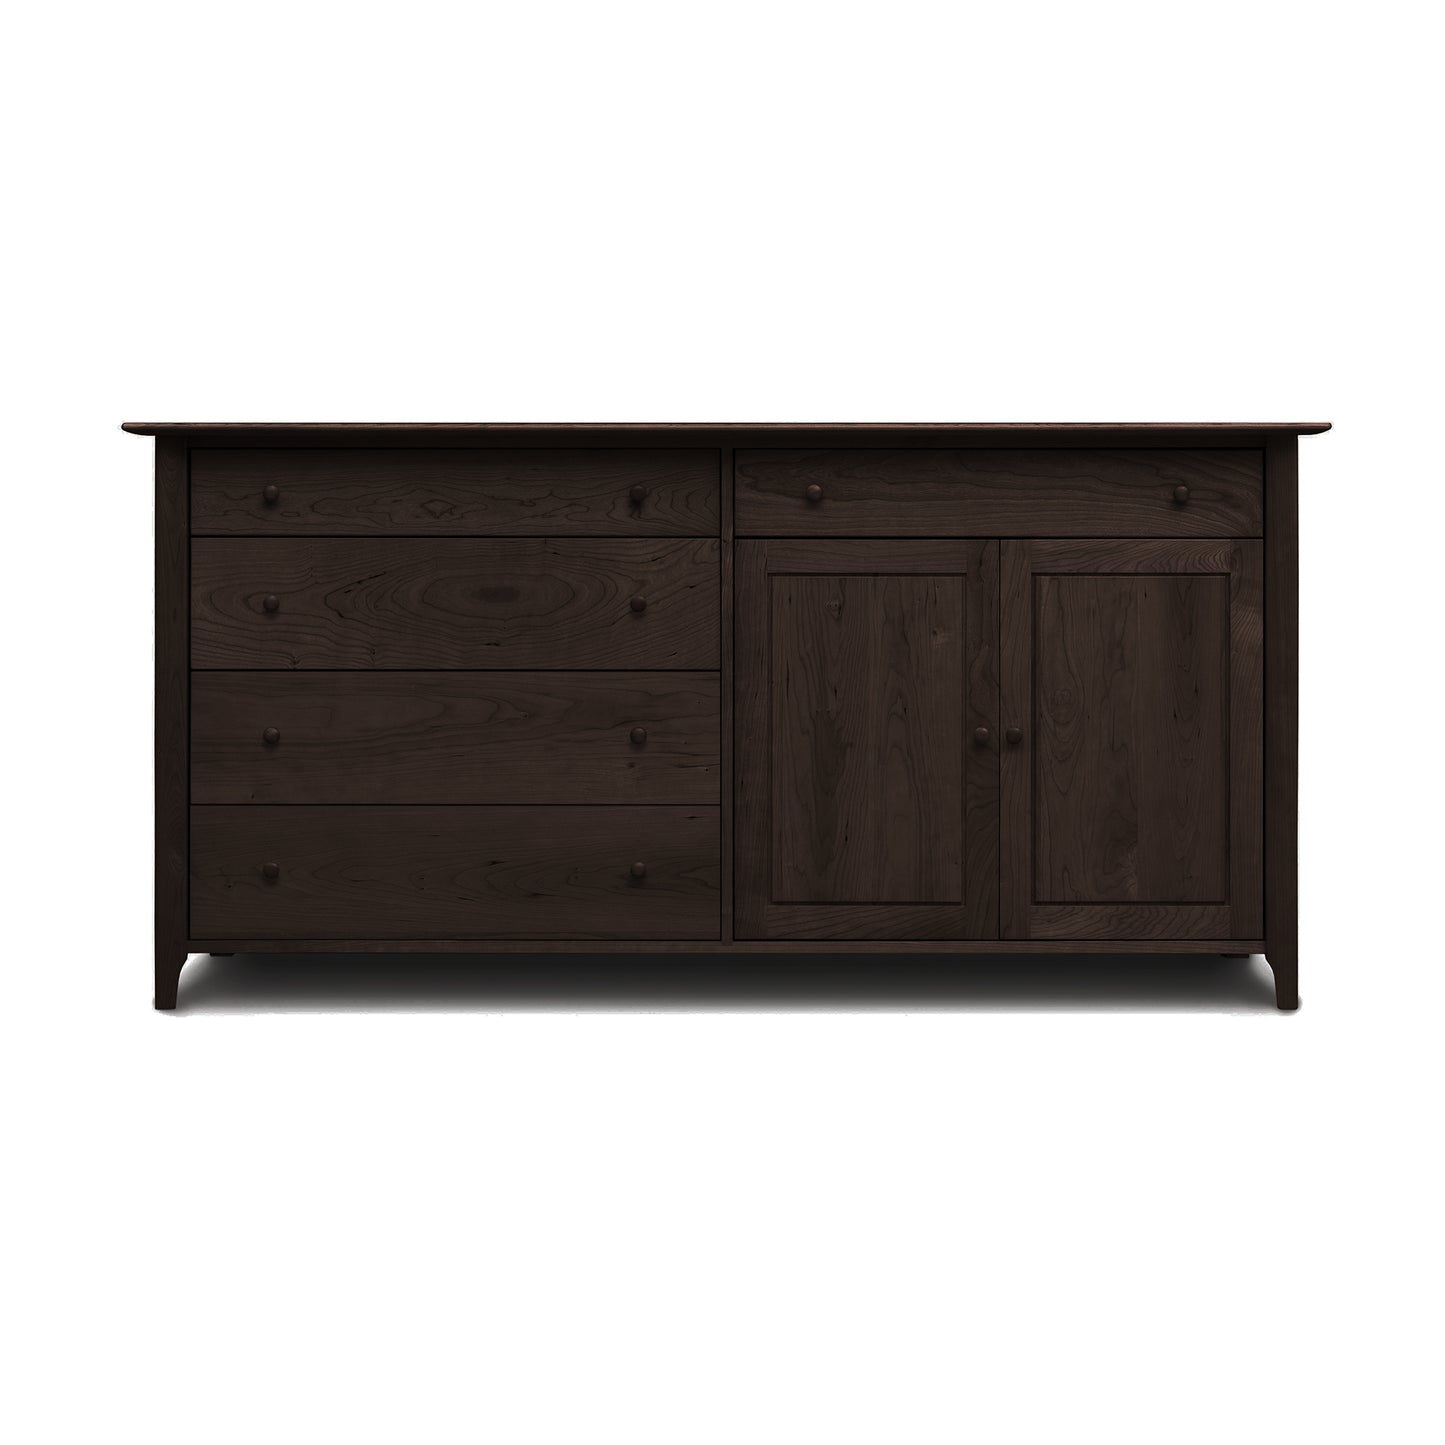 A dark brown Copeland Furniture Sarah 2 Door, 5 Drawer Buffet with three drawers on the left and two cabinet doors on the right, isolated on a white background.